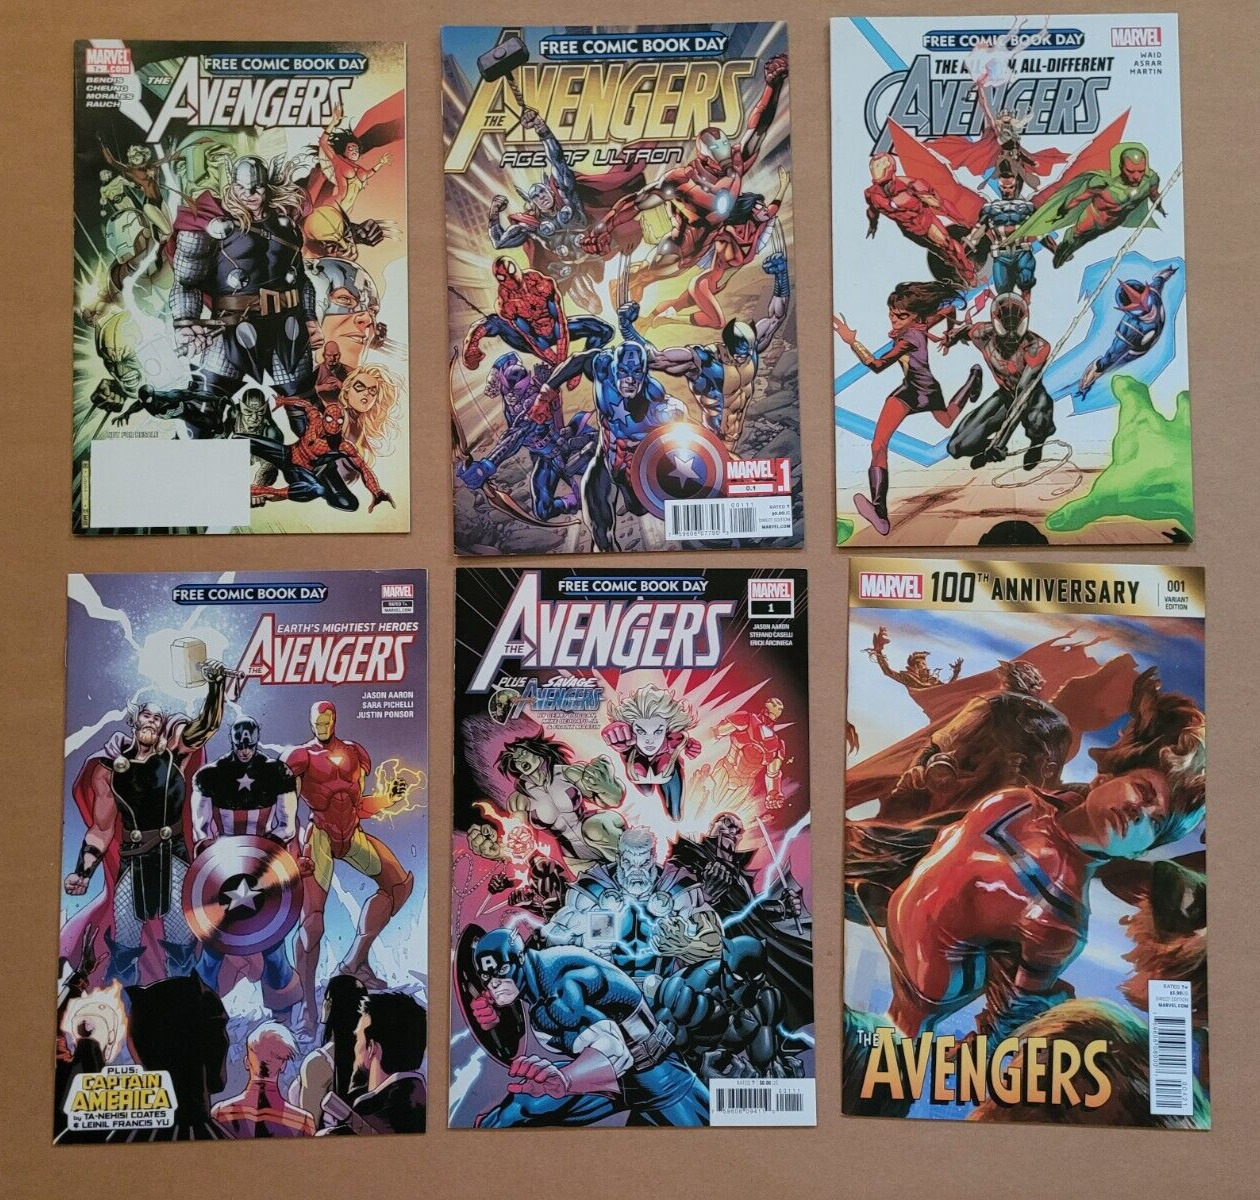 Free Comic Book Day Avengers 2009 2012 2015 2018 2019 100th Marvel Lot of 6